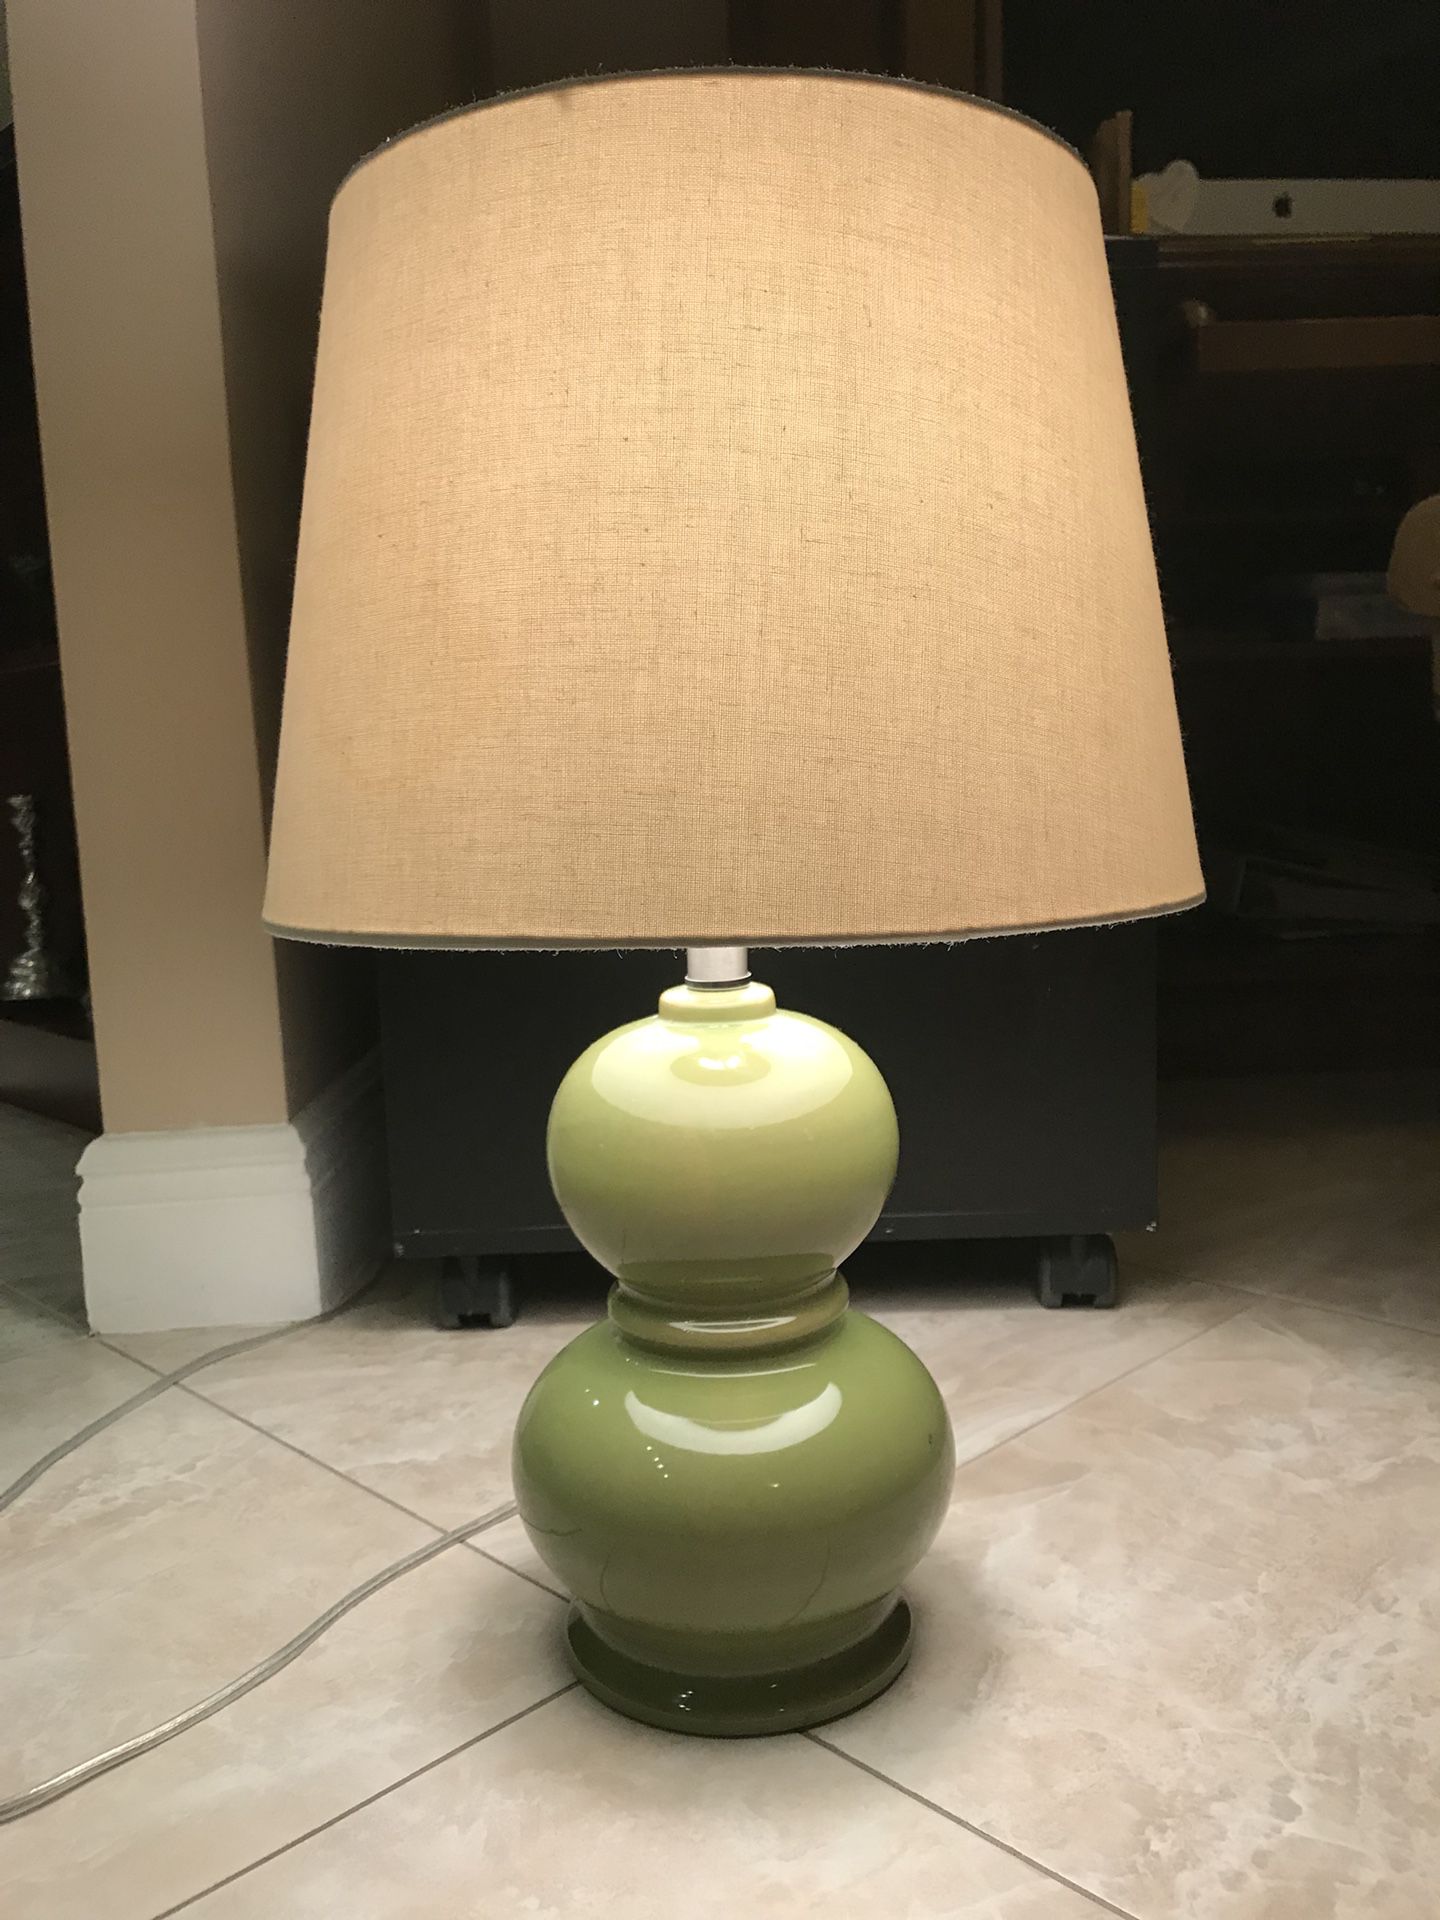 Ceramic lamp with linen shade